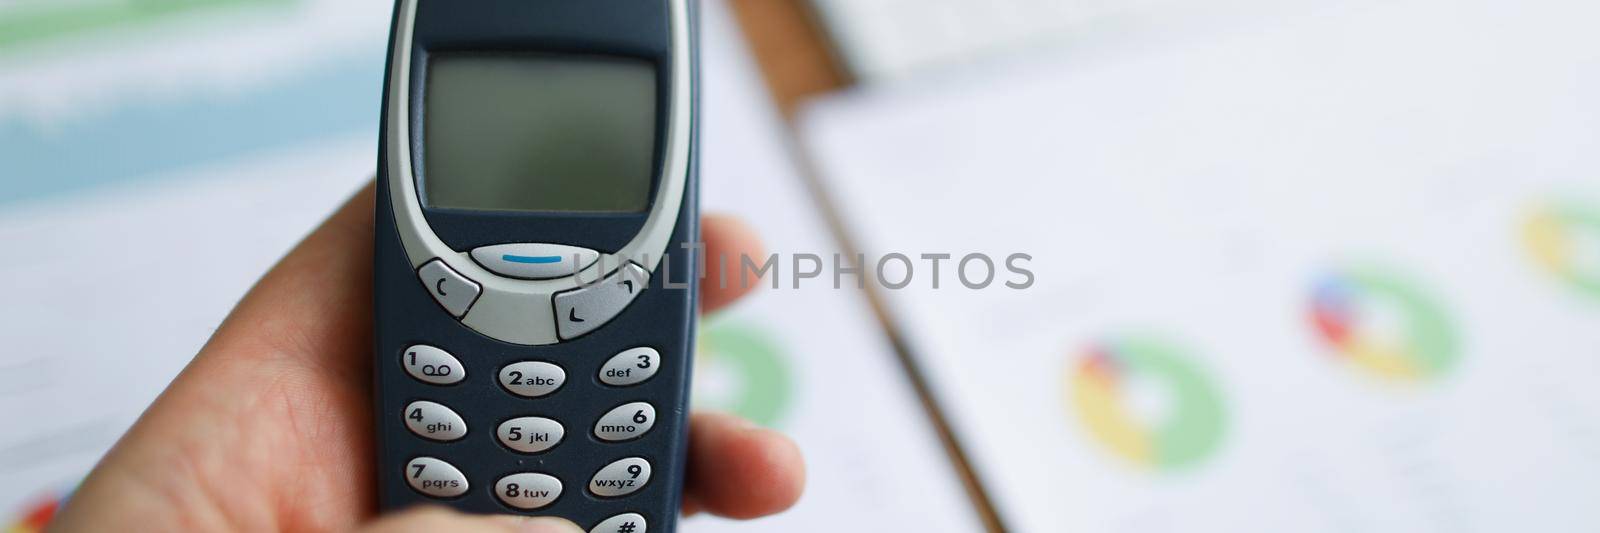 In the hands of an old model of a mobile phone against the background of reports on the table, close-up, blurry. Corporate cell phone